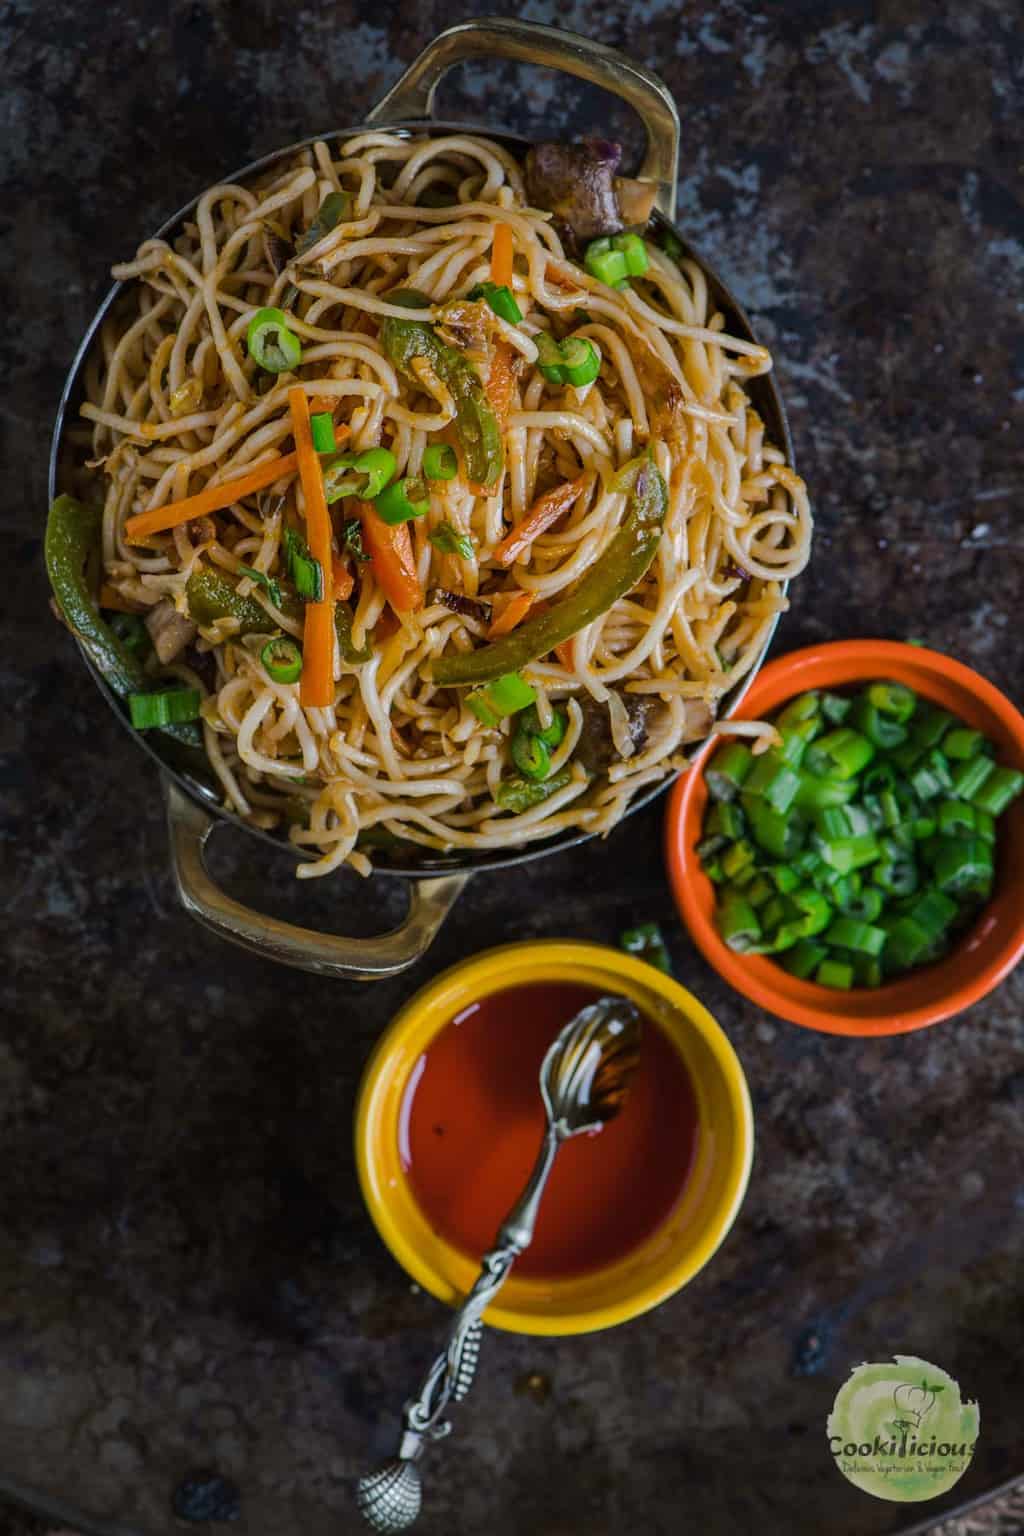 Veg Hakka Noodles served in a bowl with chili sauce and scallions on the side